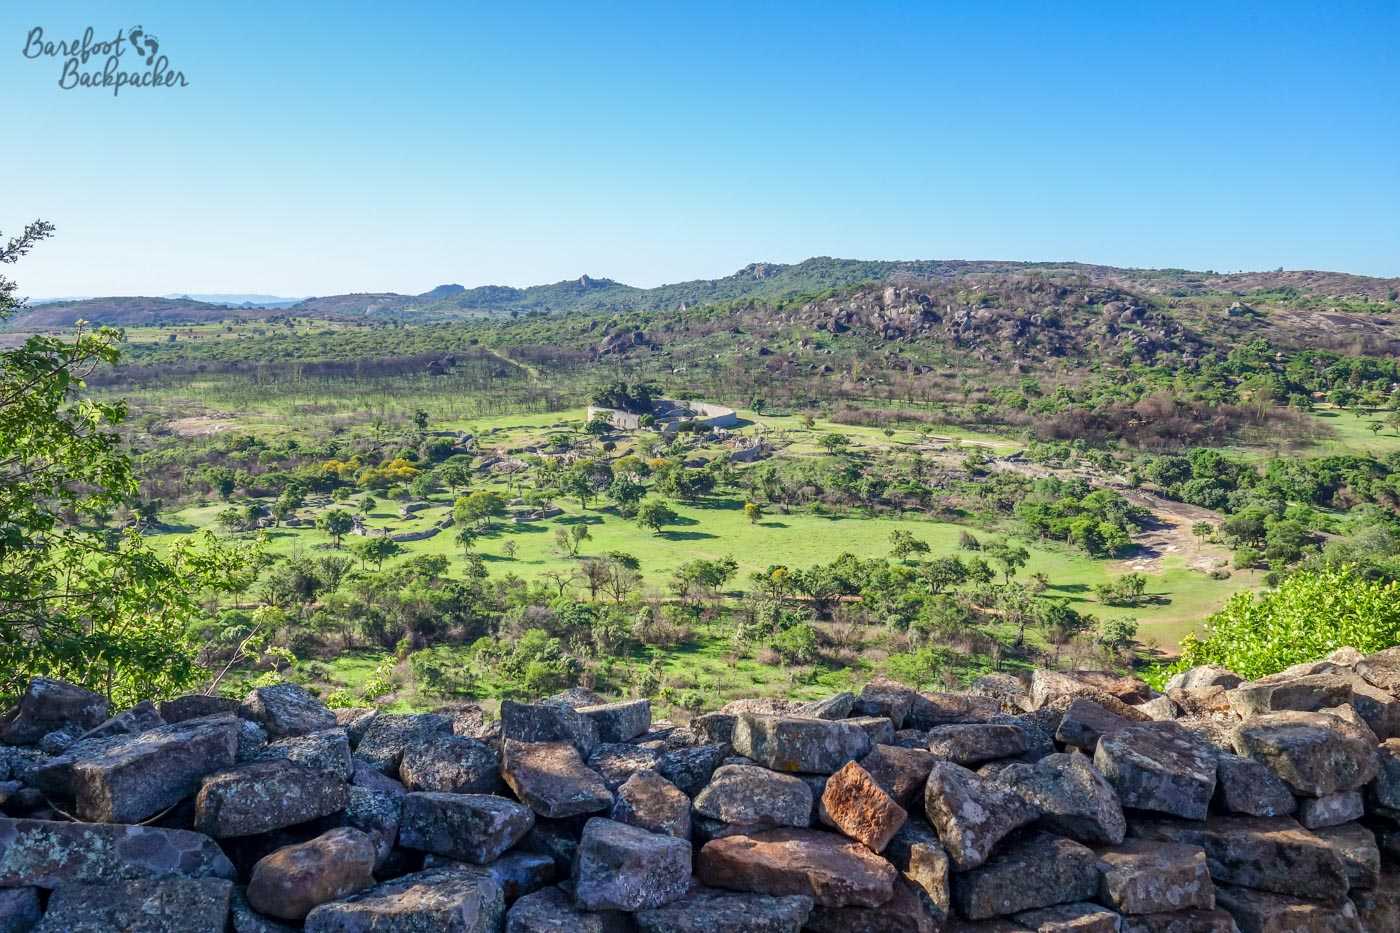 From the top of the Hill Complex, this is looking out over the Valley area and the plains on which the rest of Great Zimbabwe was built.